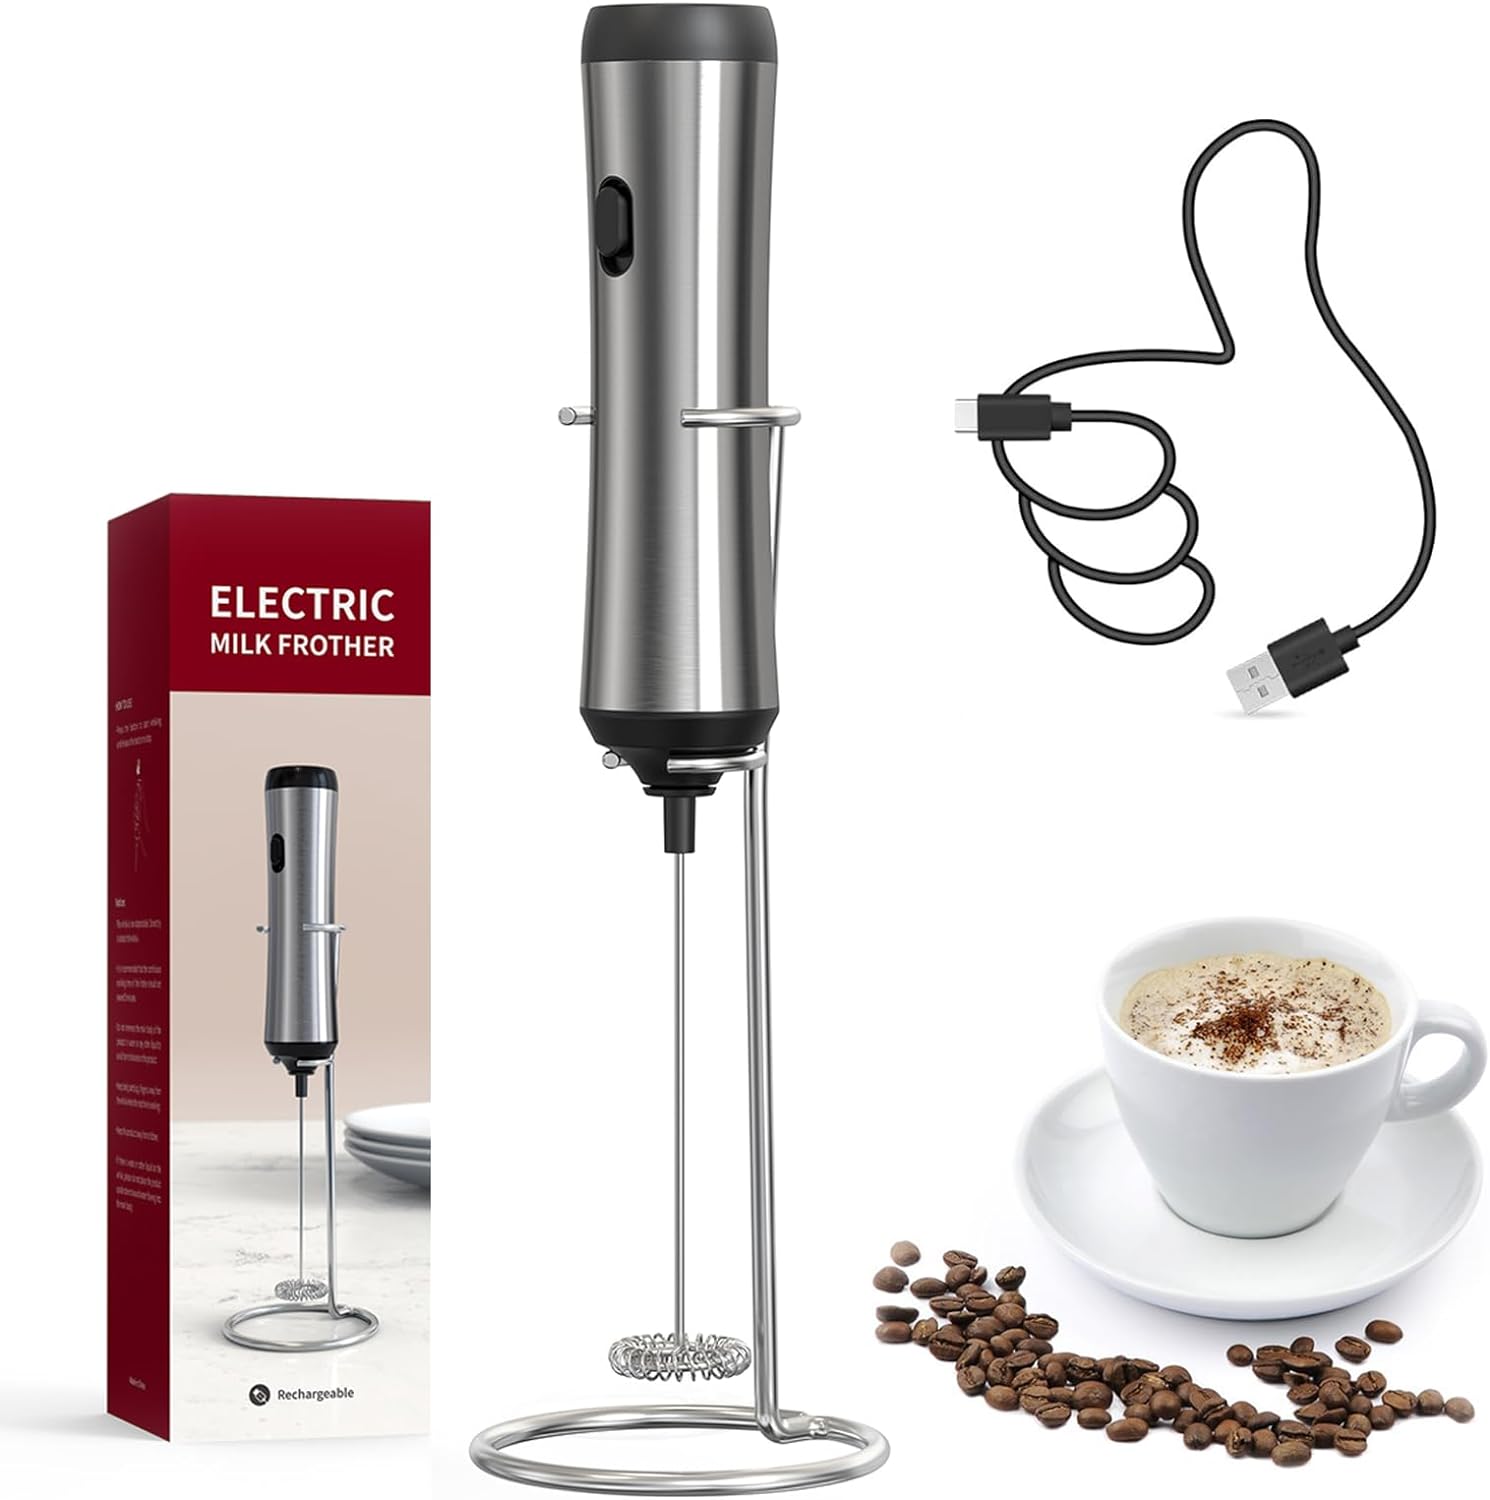 High-quality Electric Milk Frother